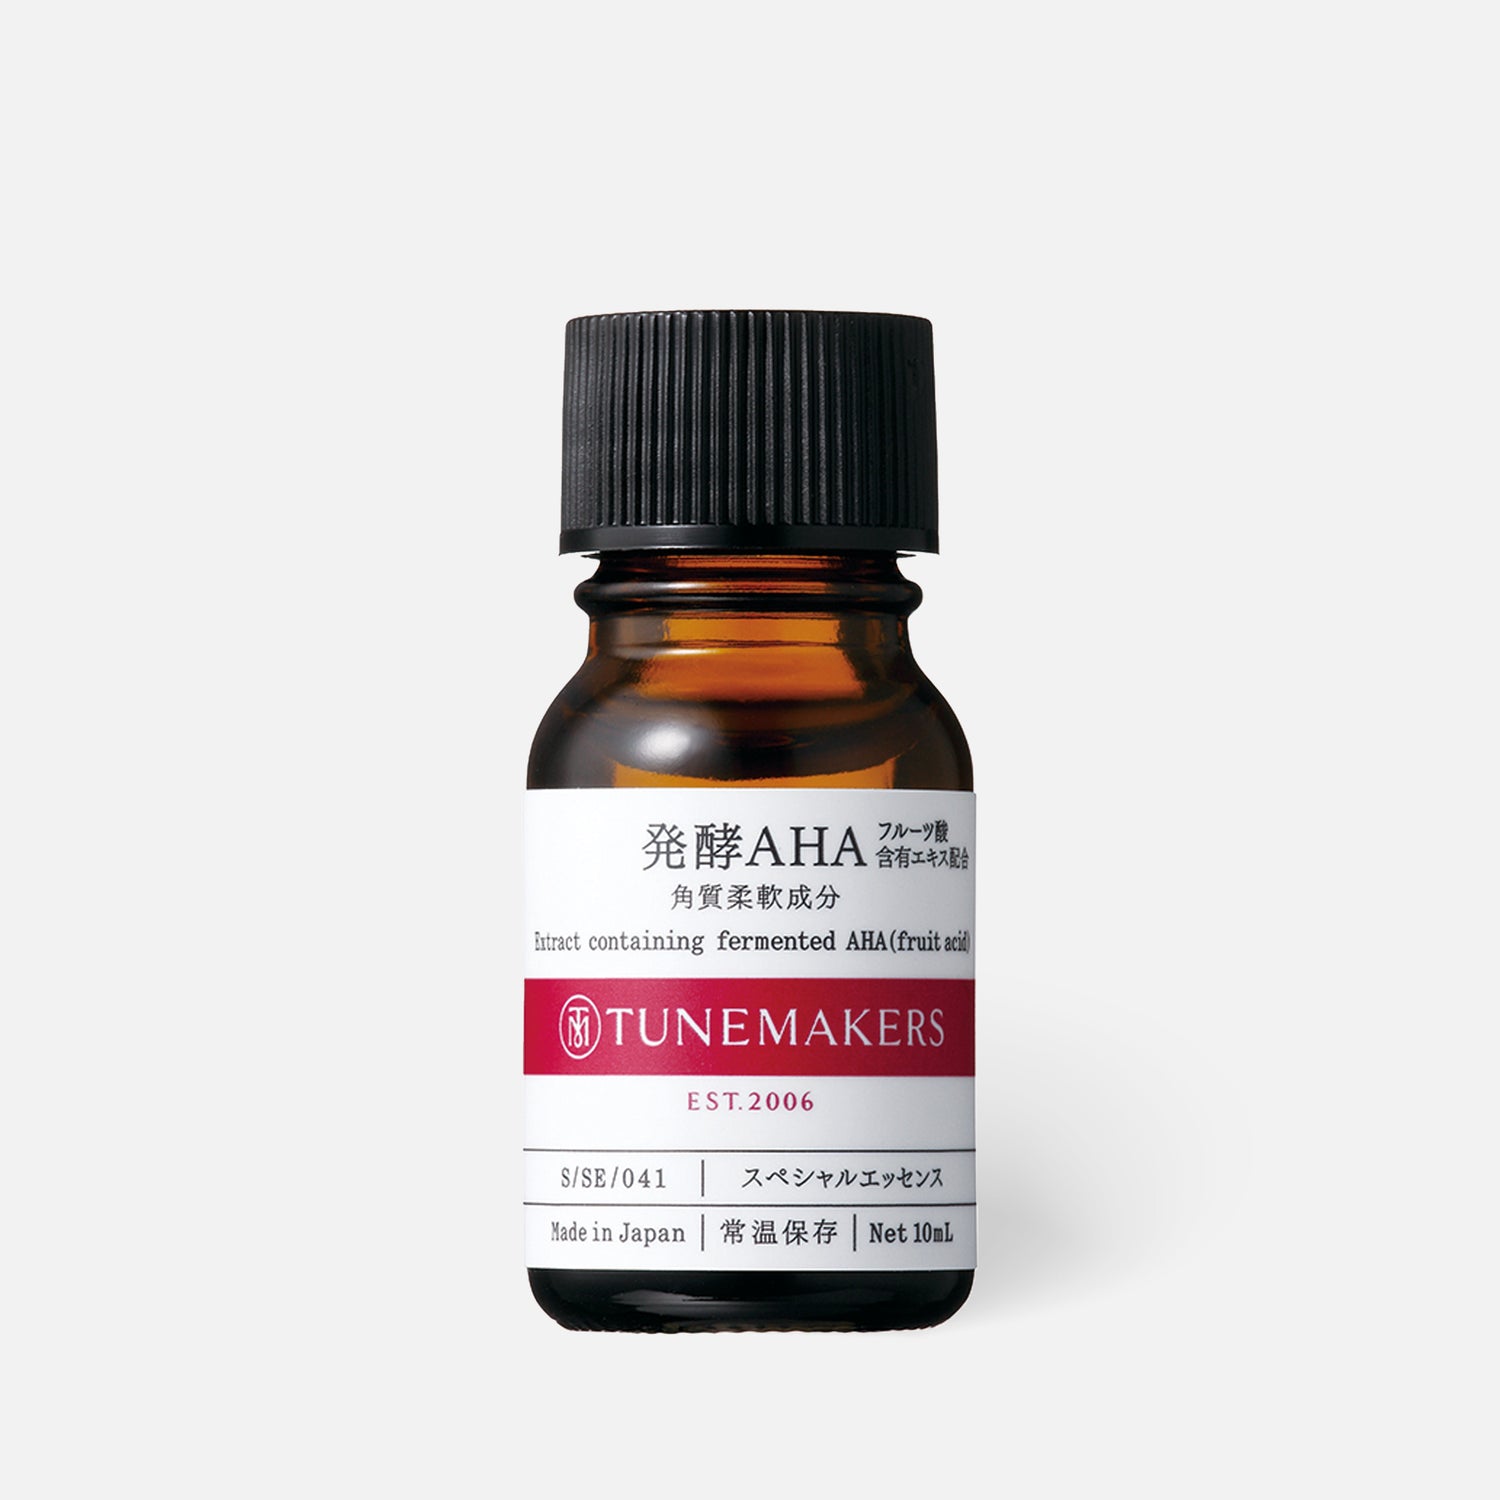 Tunemakers Extract Containing Fermented AHA 10ml